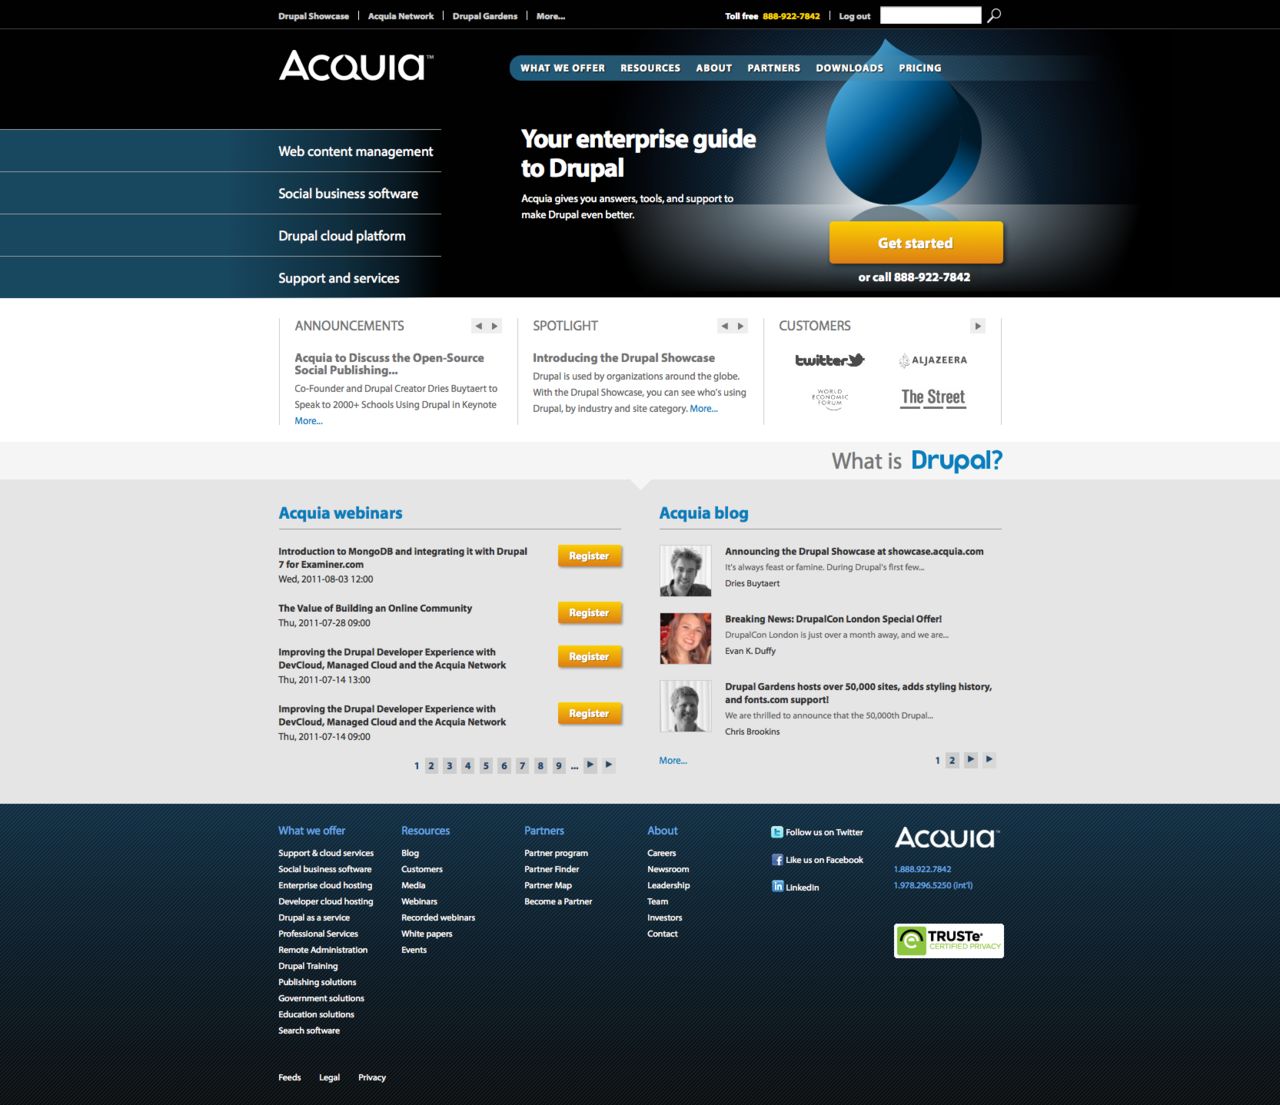 Acquia.com's homepage as captured in July 2011.